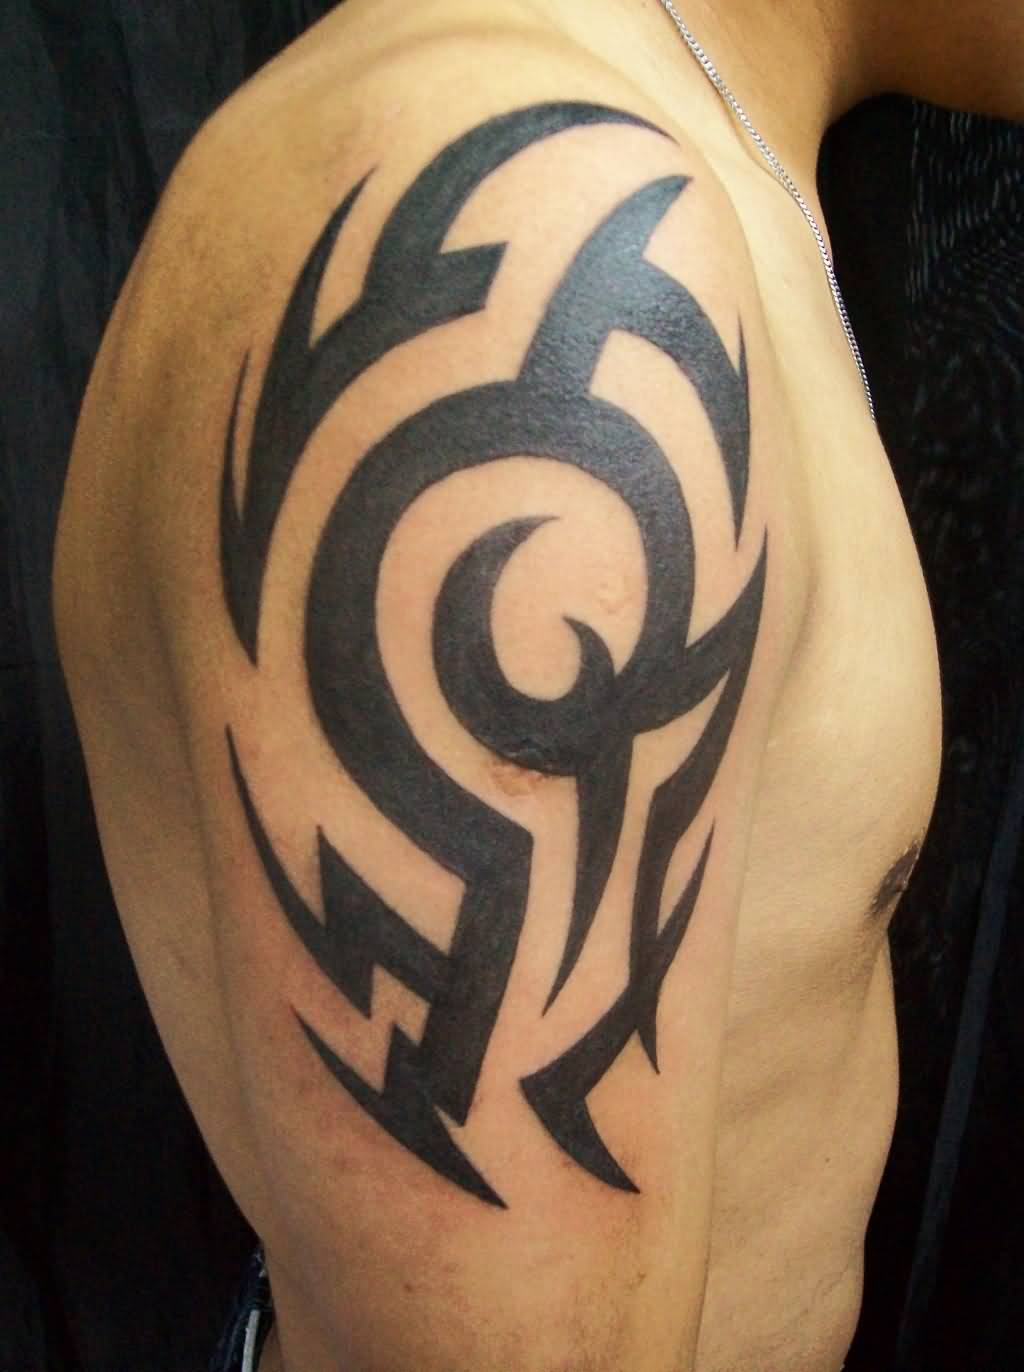 Black Ink Tribal Tattoo On Upper Arm For Guys Tattoo Ideas intended for dimensions 1024 X 1372